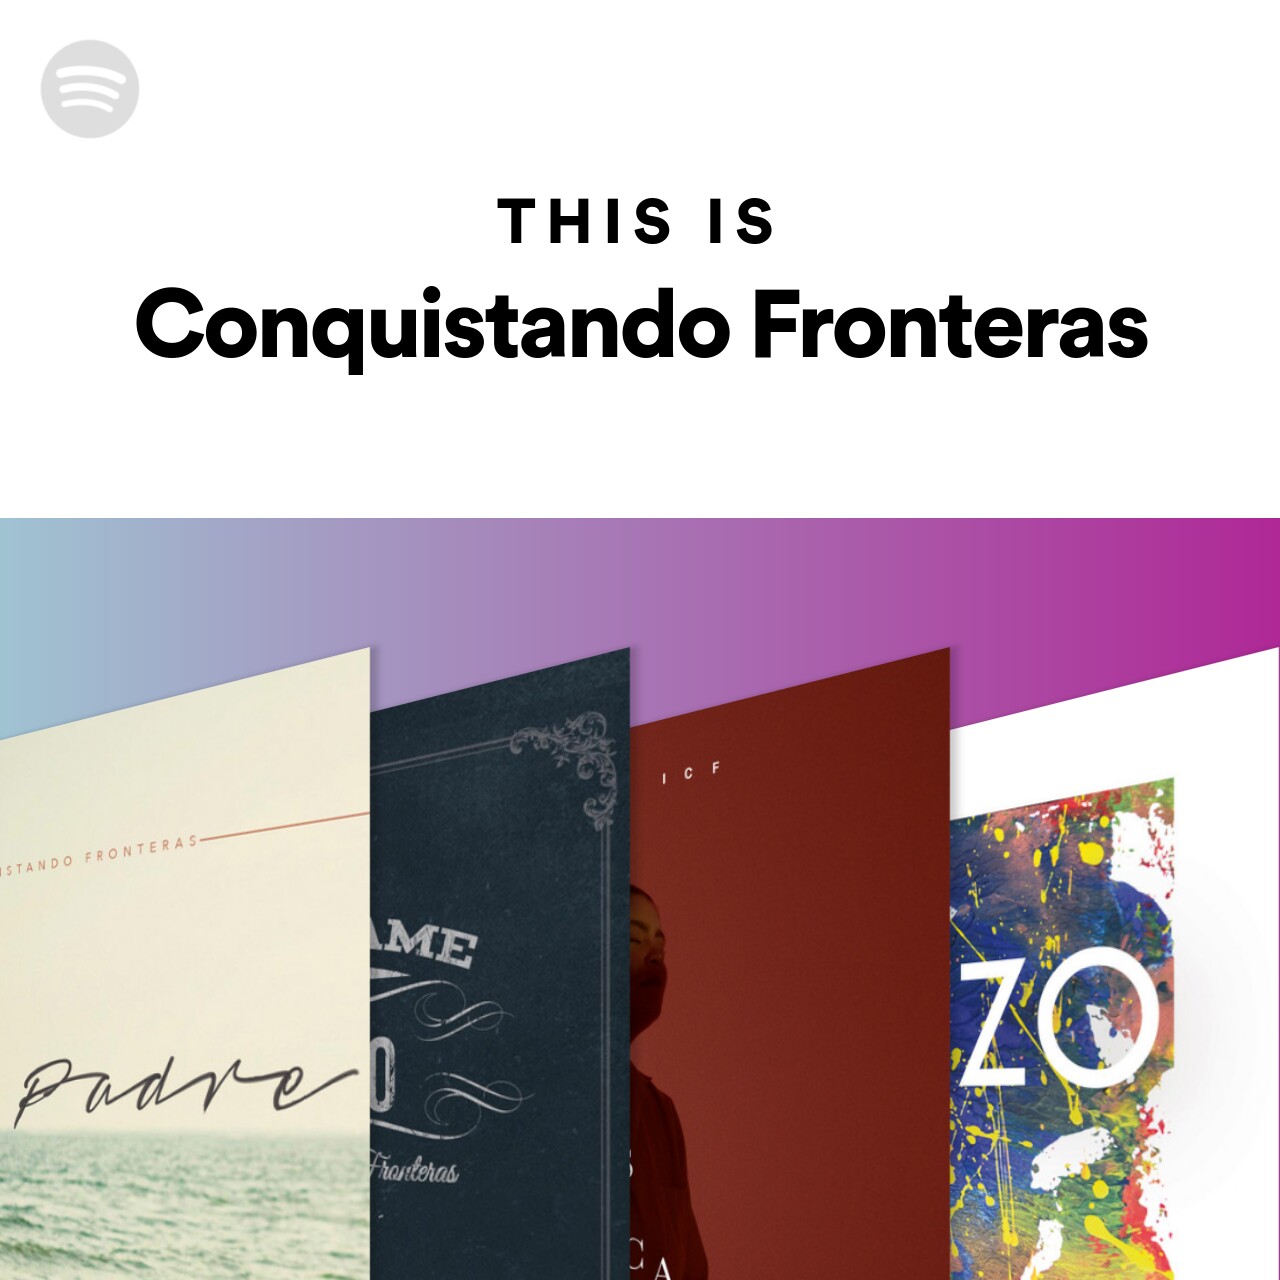 Spotify Playlist This Is Conquistando Fronteras on 